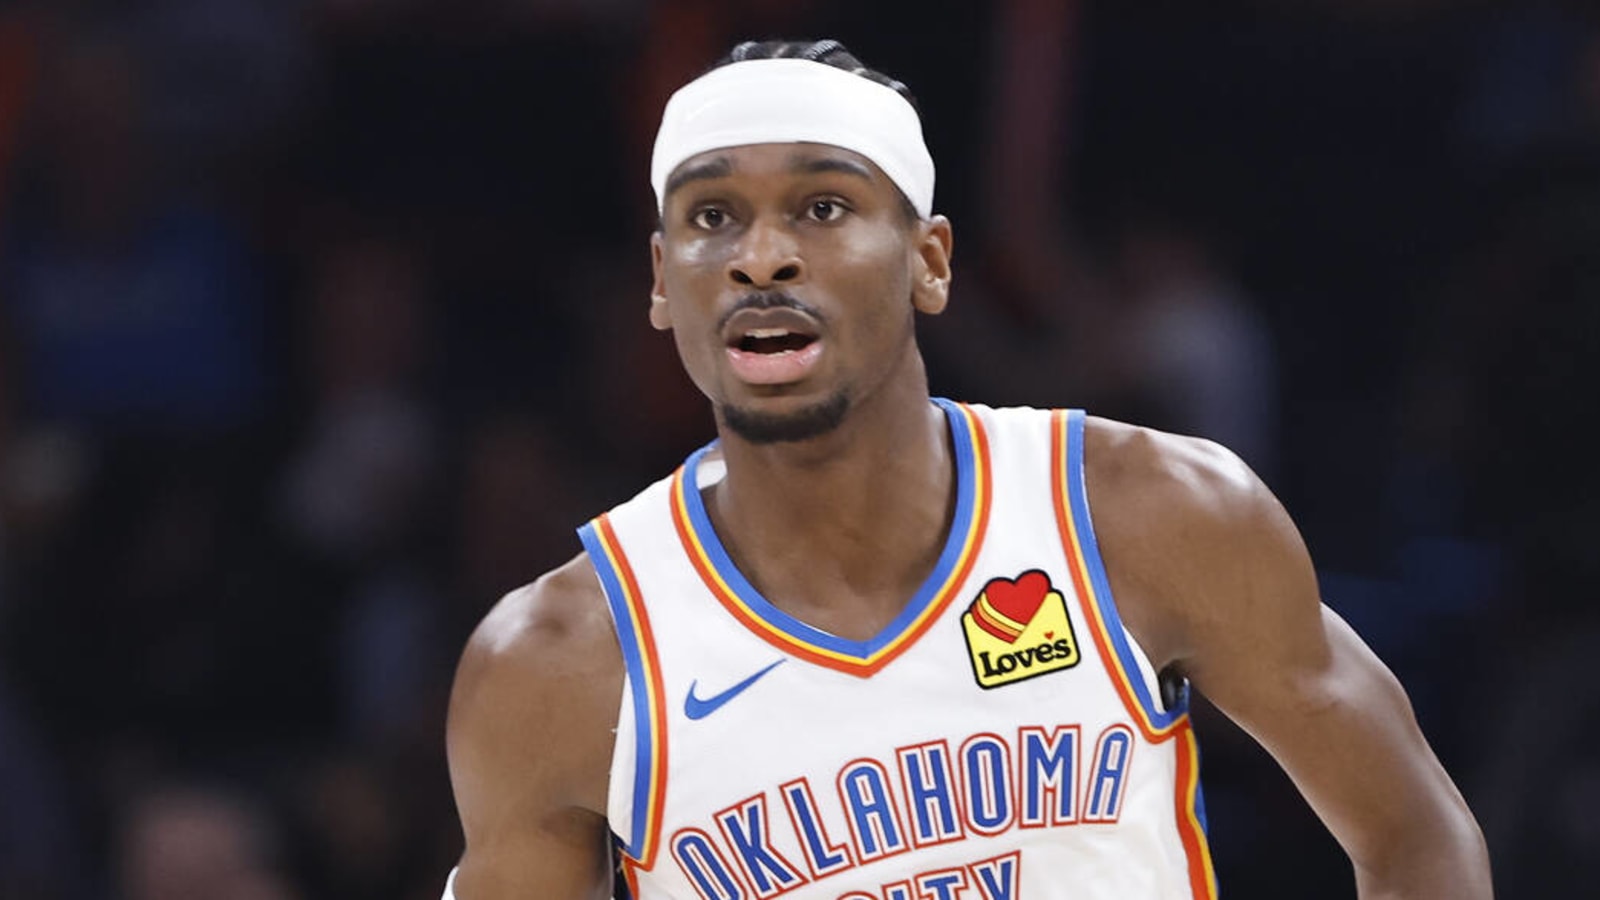 Thunder star breaks franchise record after questionable play